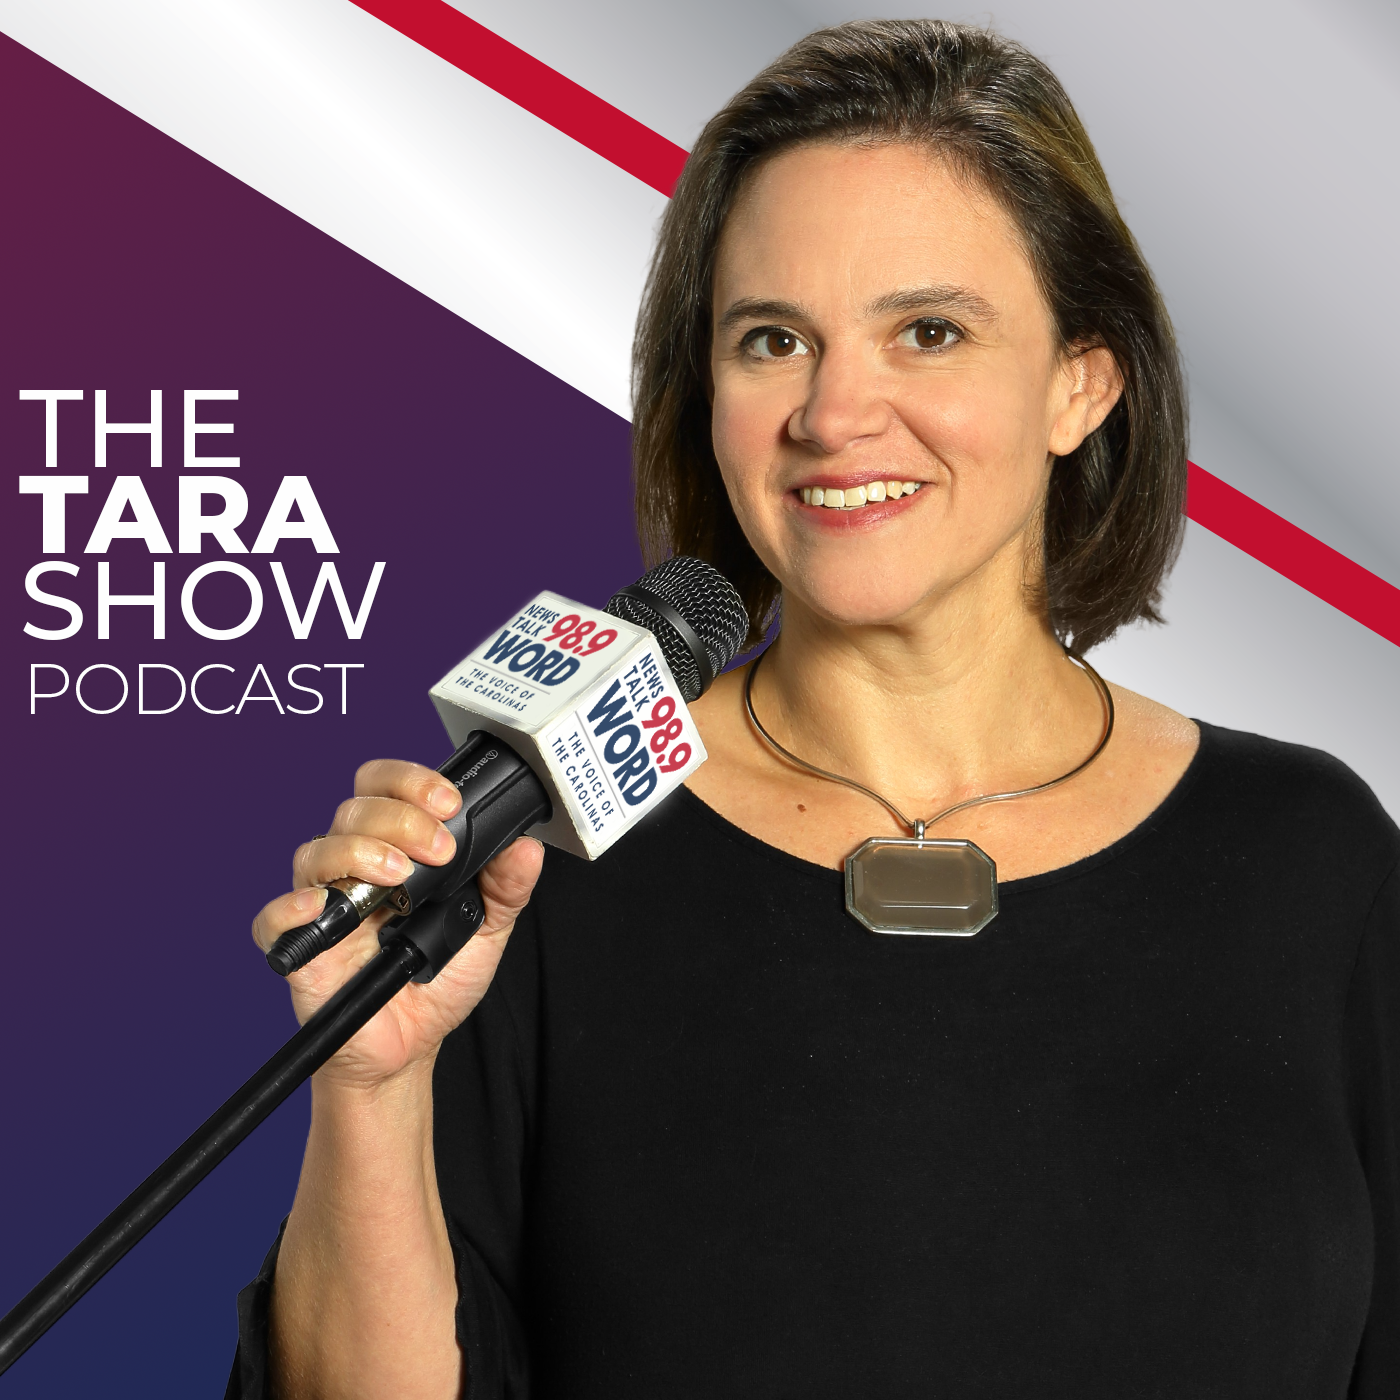 Hour 4: The Tara Show - “Trump in Bodega - Tara Interview with Francisco Mortise” “Tara Interview with Michelle Woodhouse” “Biden Laundering and Fentanyl Deaths” “The Child Sex Ring and Illegal Immigration”